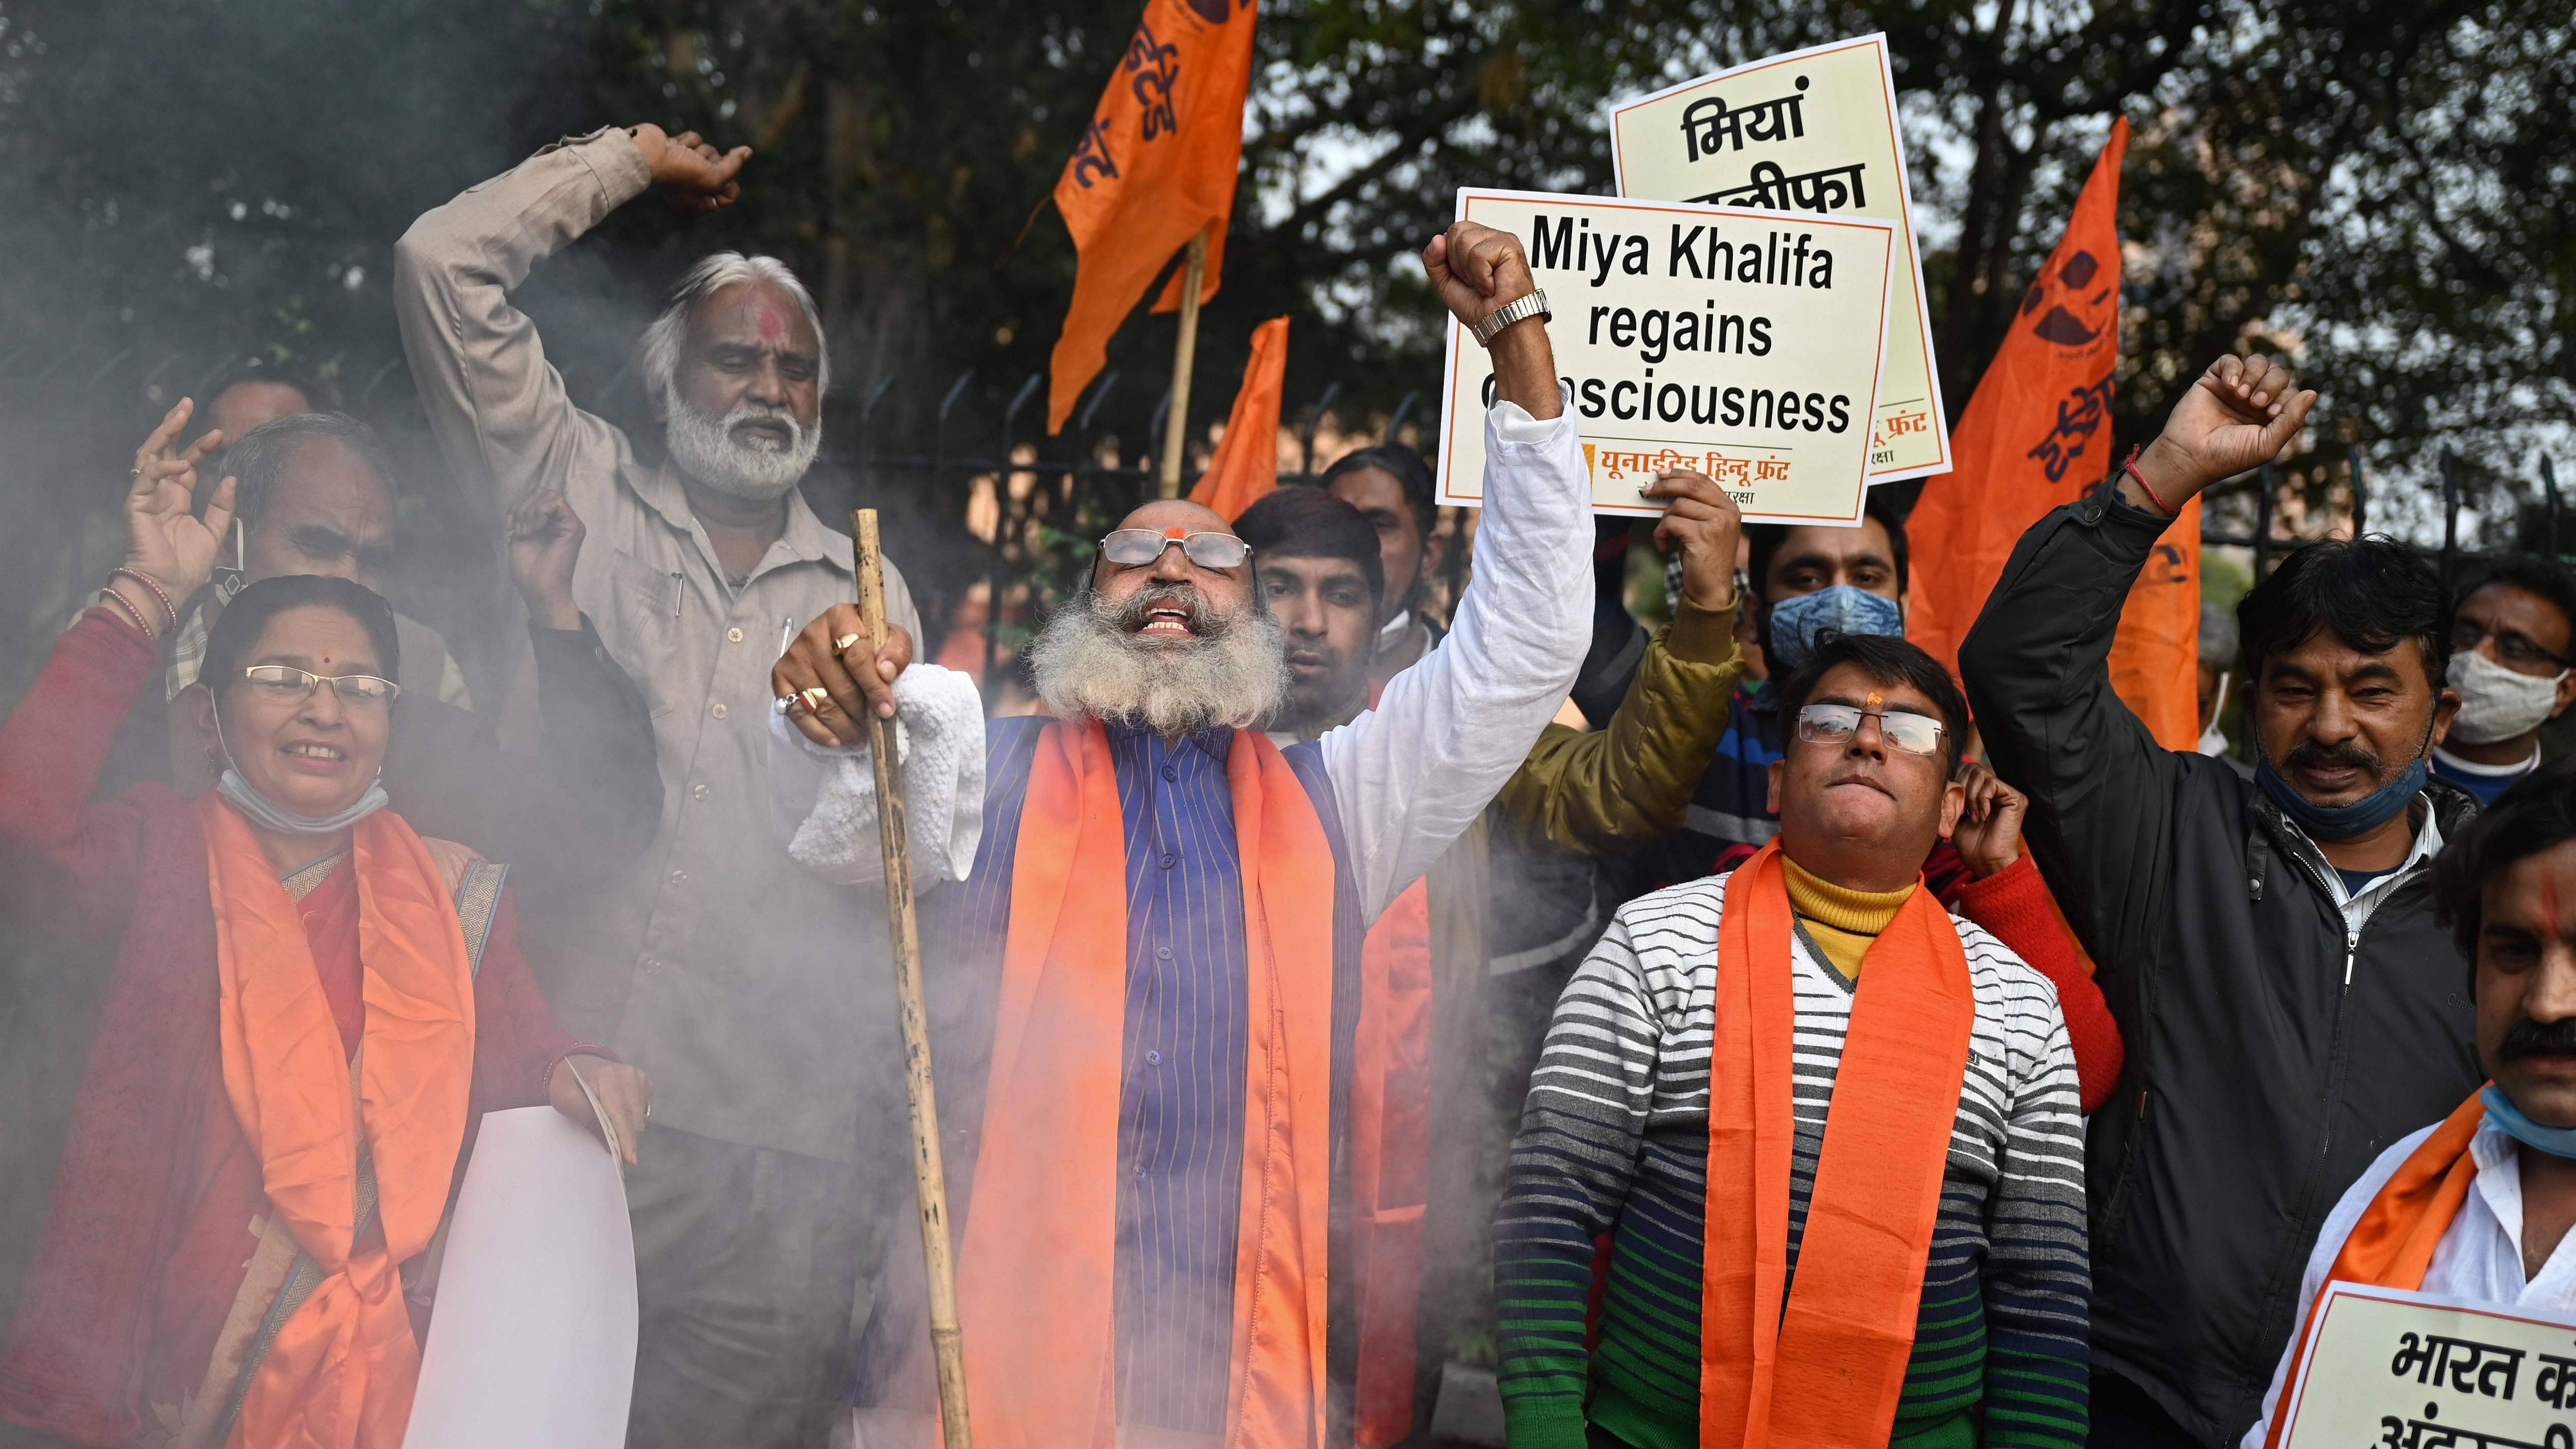 Activists of United Hindu Front (UHF) hold placards and shout slogans during a demonstration in New Delhi on February 4, 2021, after Swedish climate activist Greta Thunberg and Barbadian singer Rihanna. Credit: AFP